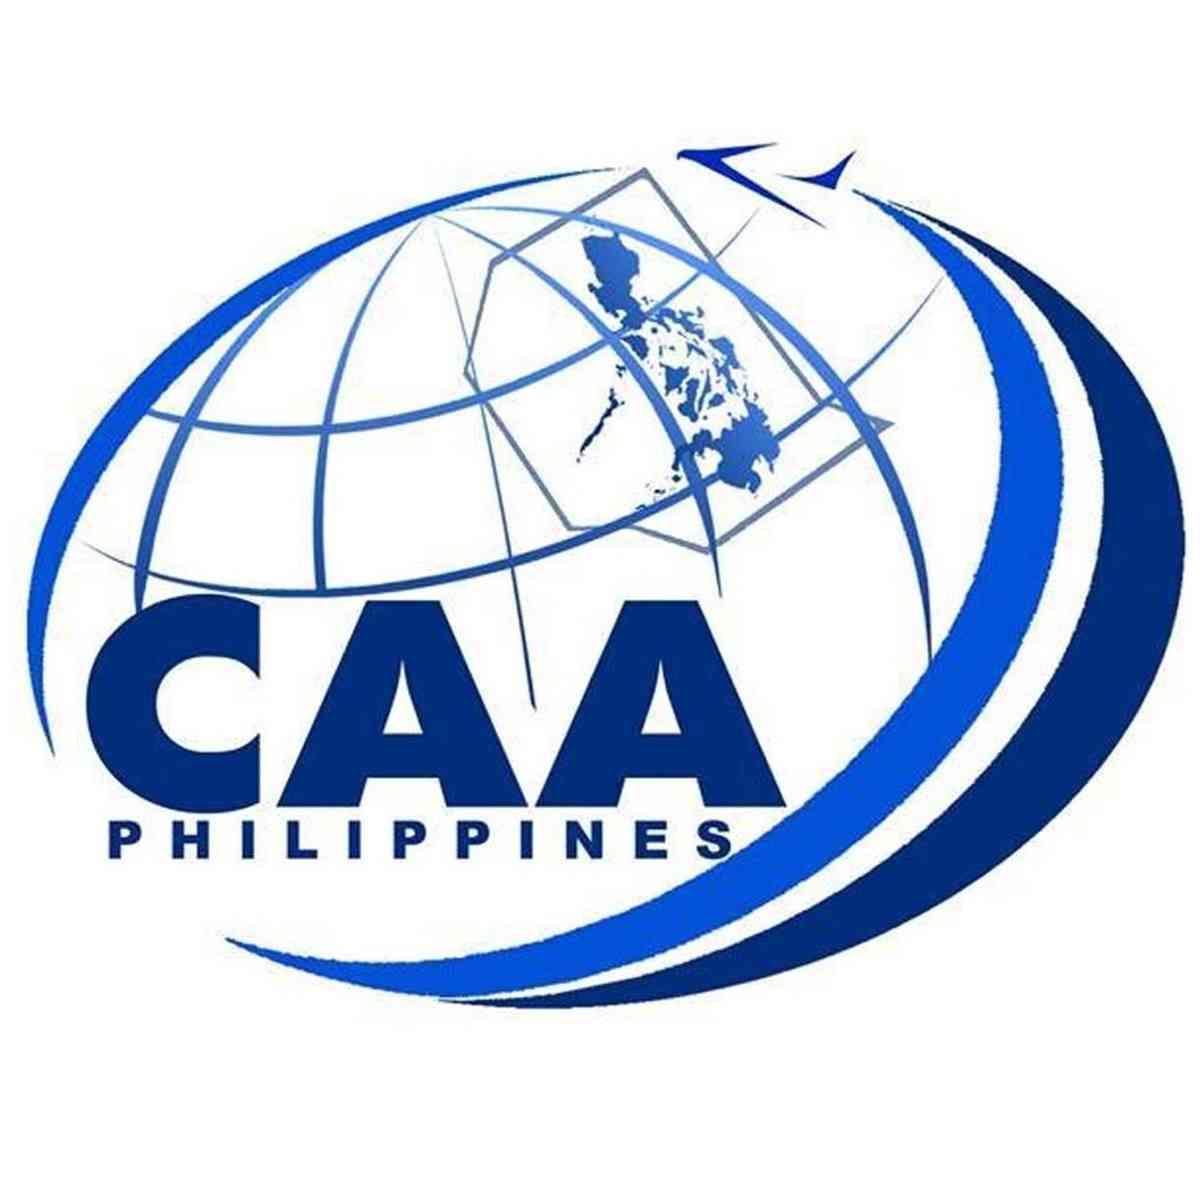 CAAP takes full responsibility on New year's day airport traffic fiasco